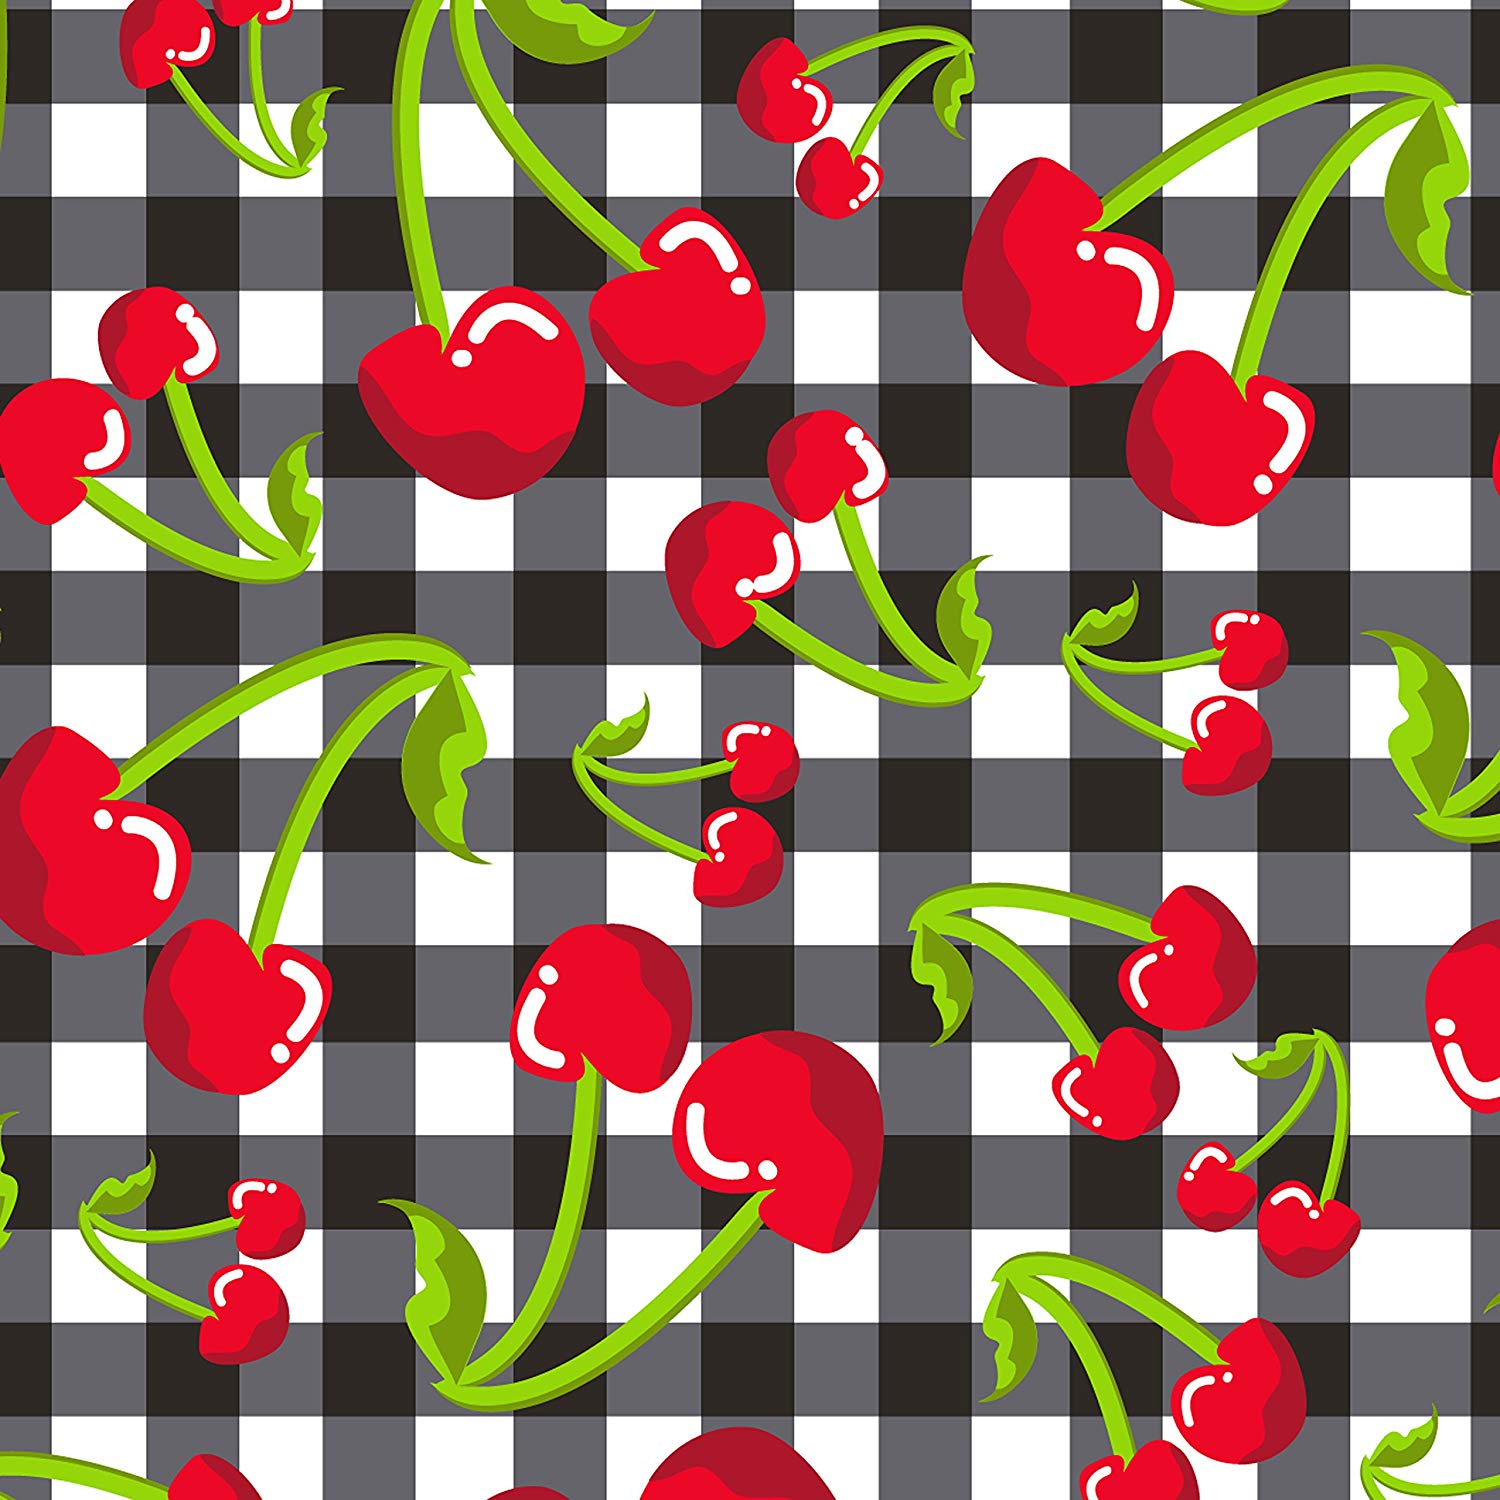 Cherries on a Checkerboard Background